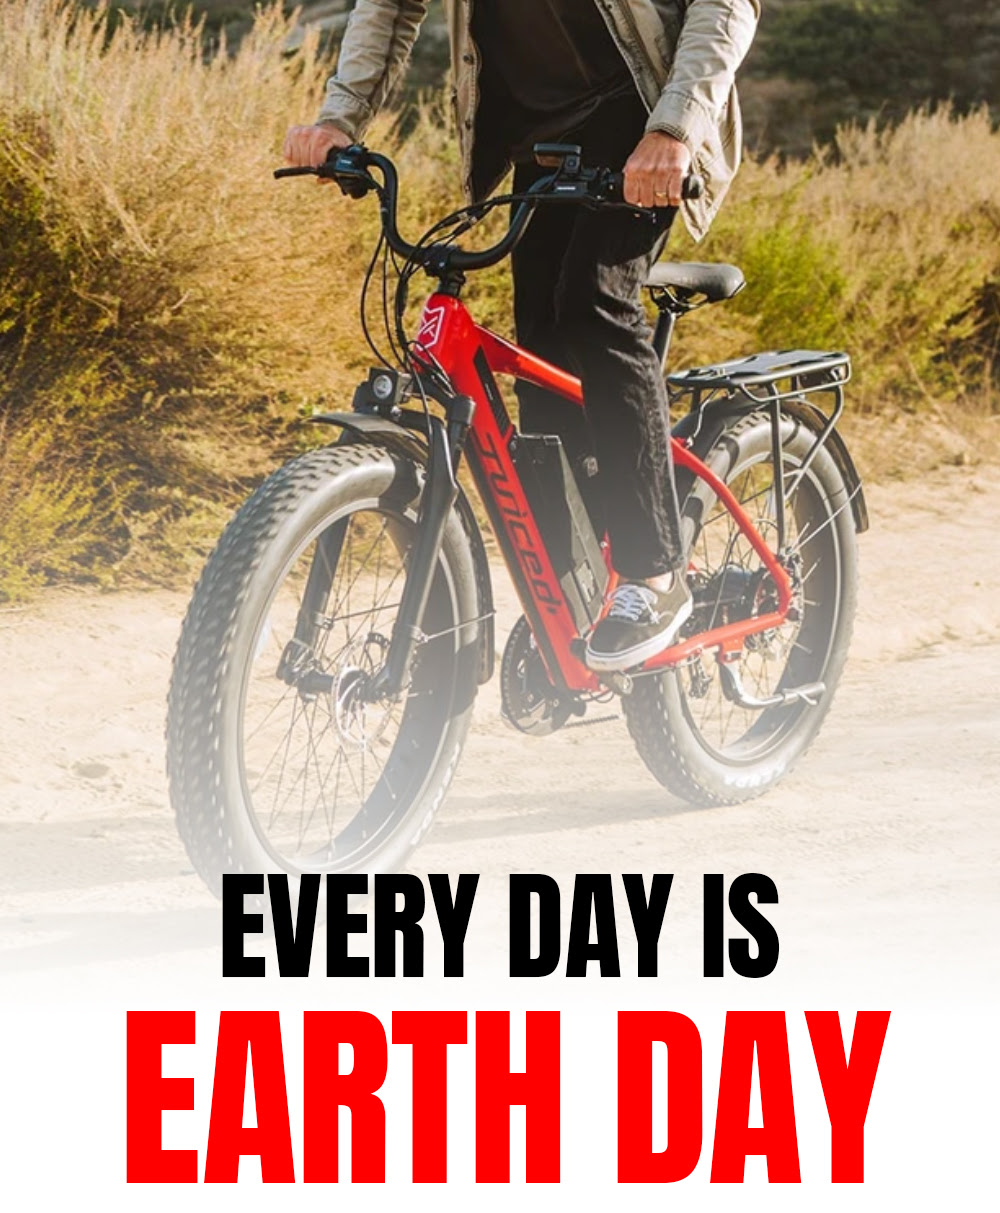 EVERY DAY IS EARTH DAY